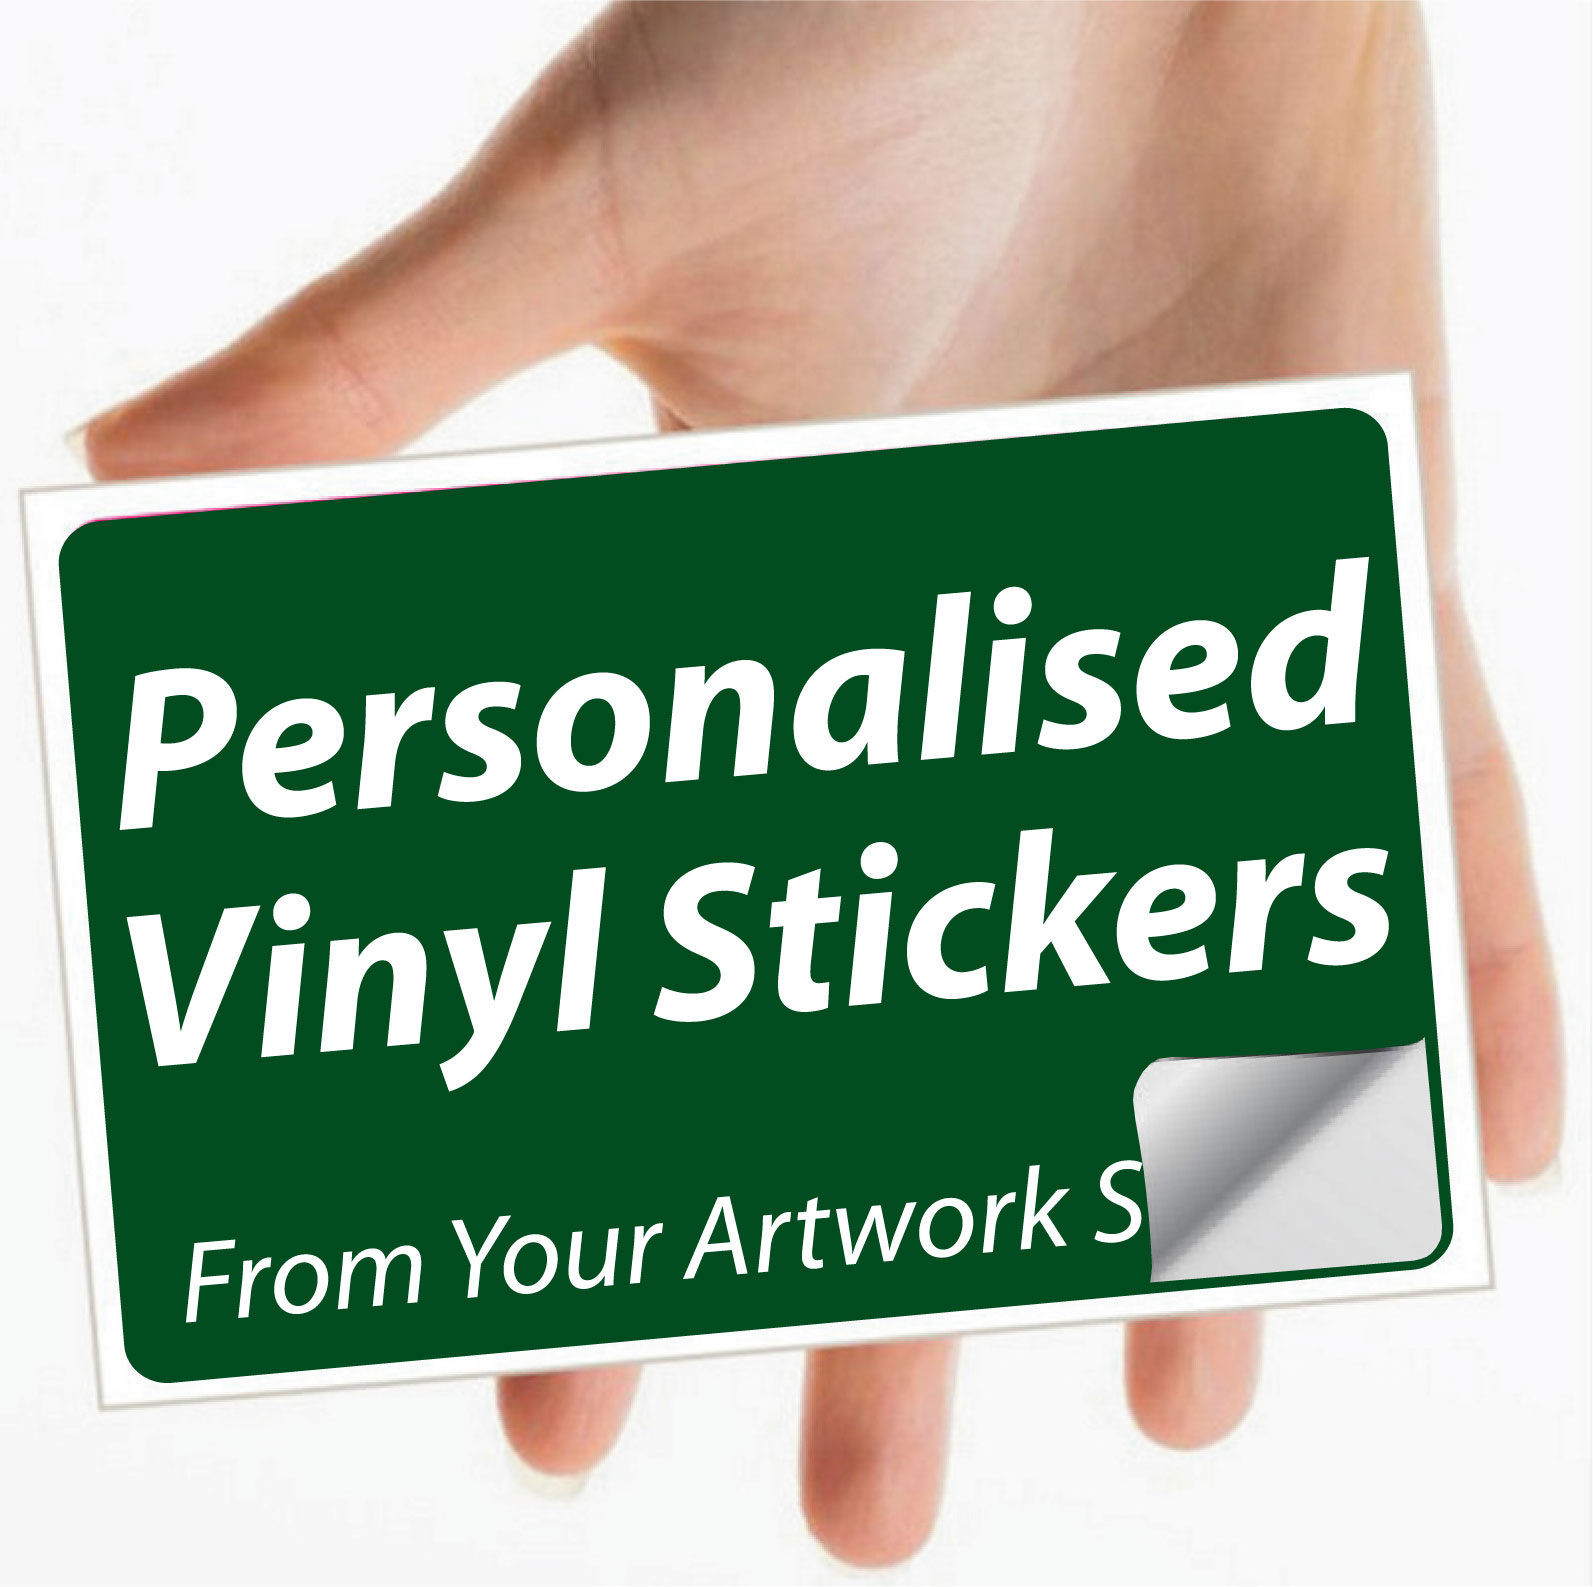 High quality personalised vinyl stickers with logo.  Custom Vynil Stickers   Personalised stickers are printed with your artwork